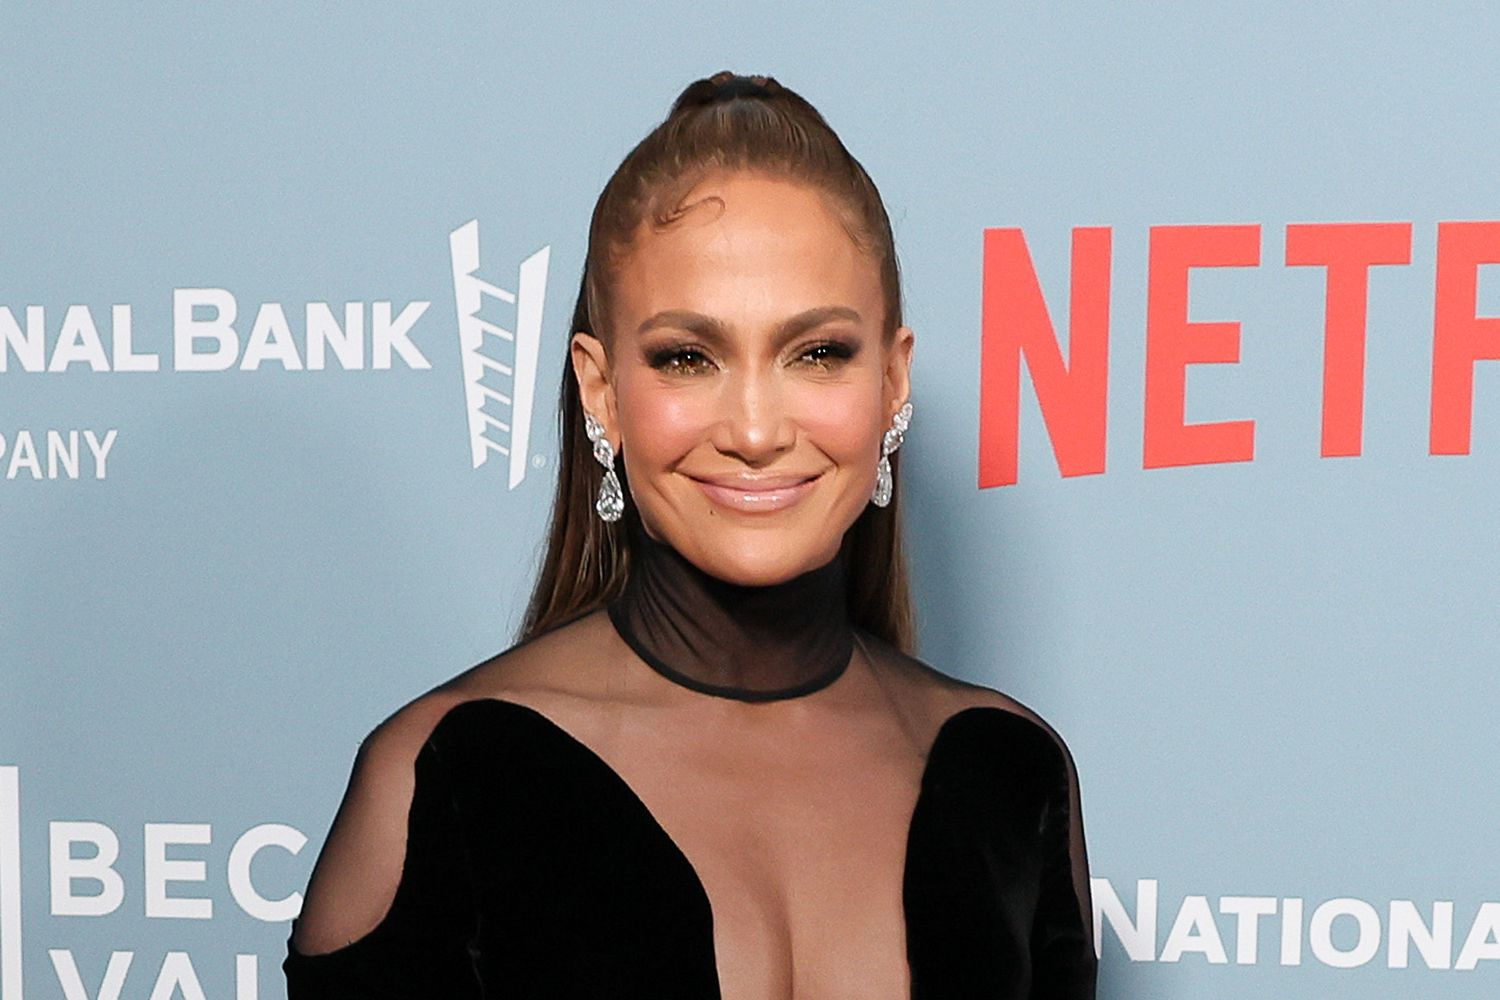 Jennifer Lopez’s Festive Dress Had One Standout Detail We’re Bringing Into the New Year